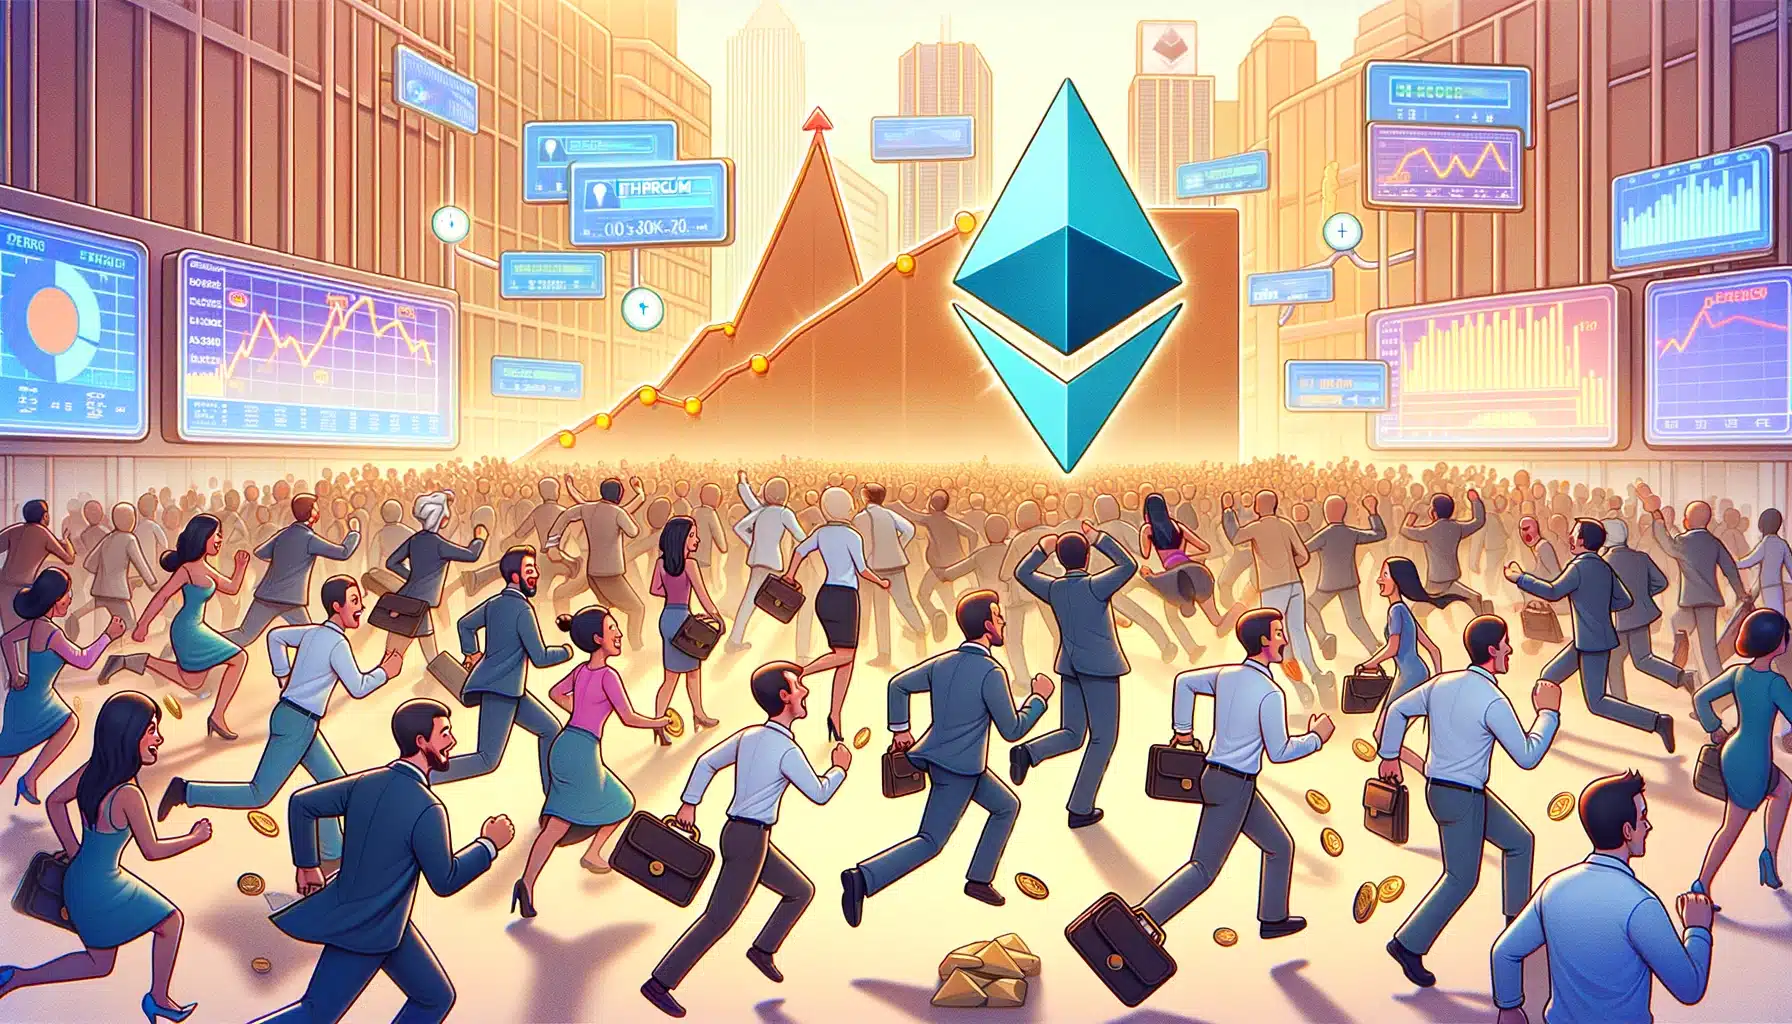 Ethereum's short-term holders rise: Why this is a bullish sign